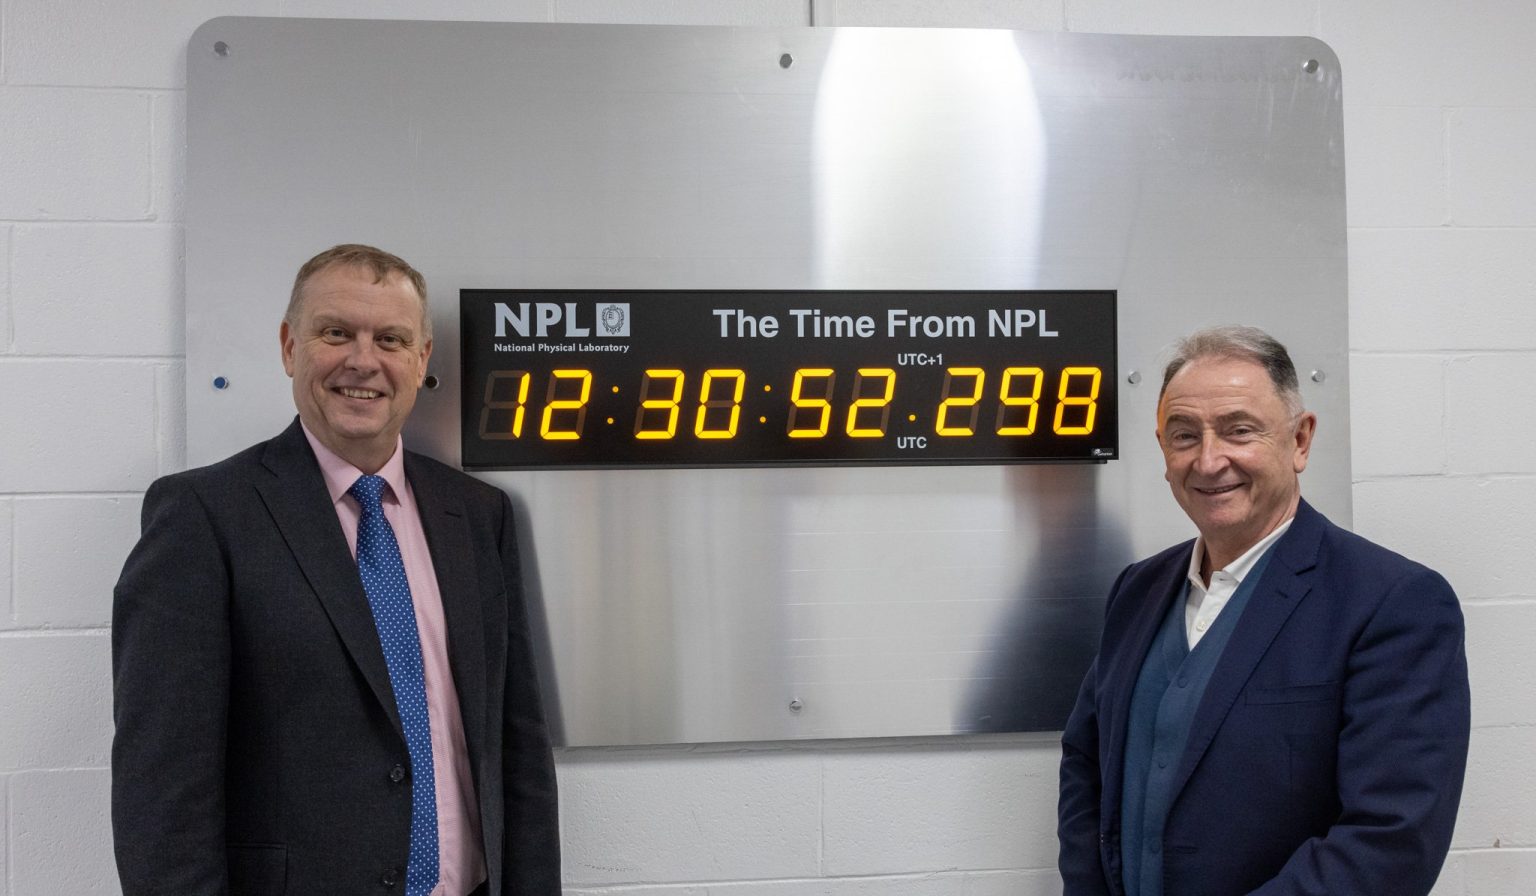 Peter Thompson, Ph.D., CEO of NPL, left, with Jim McDonald, professor at the University of Strathclyde. (Image: NPL) 